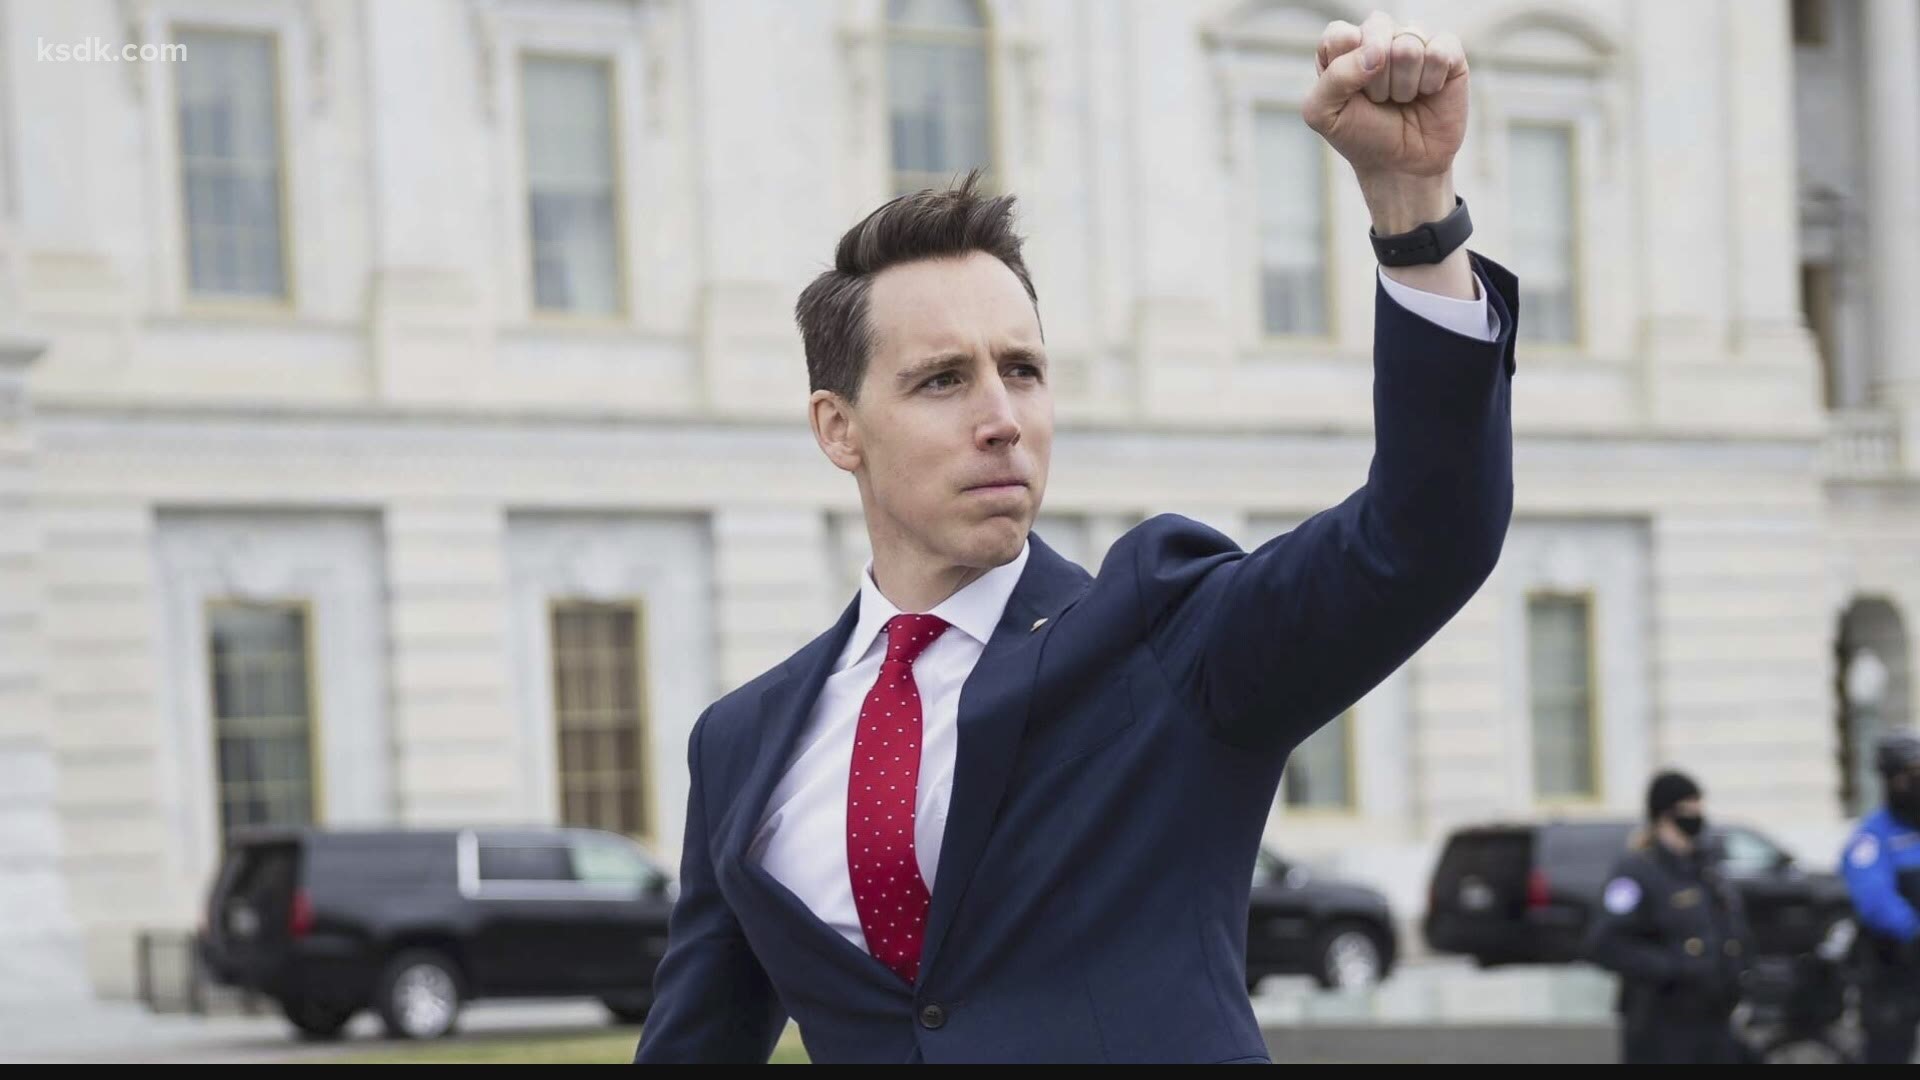 Other than Trump himself, no politician has suffered the fallout as has Hawley. Multiple donors have pulled financial support.